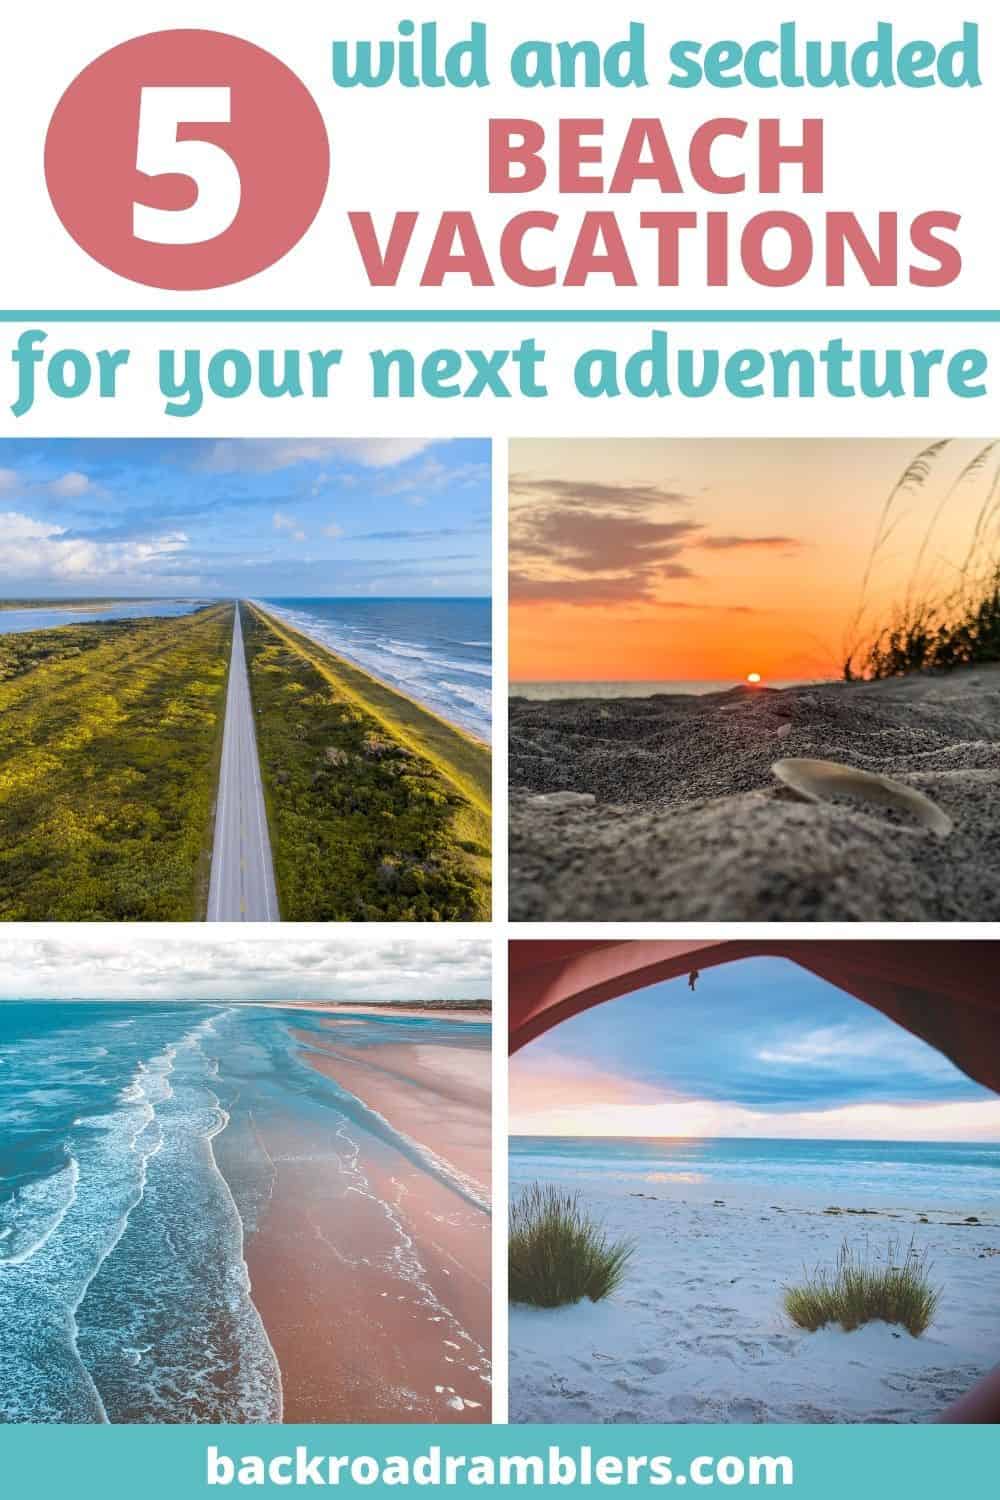 A collage of beach photos in the USA. Text overlay: 5 wild and secluded beach vacations for your next adventure.